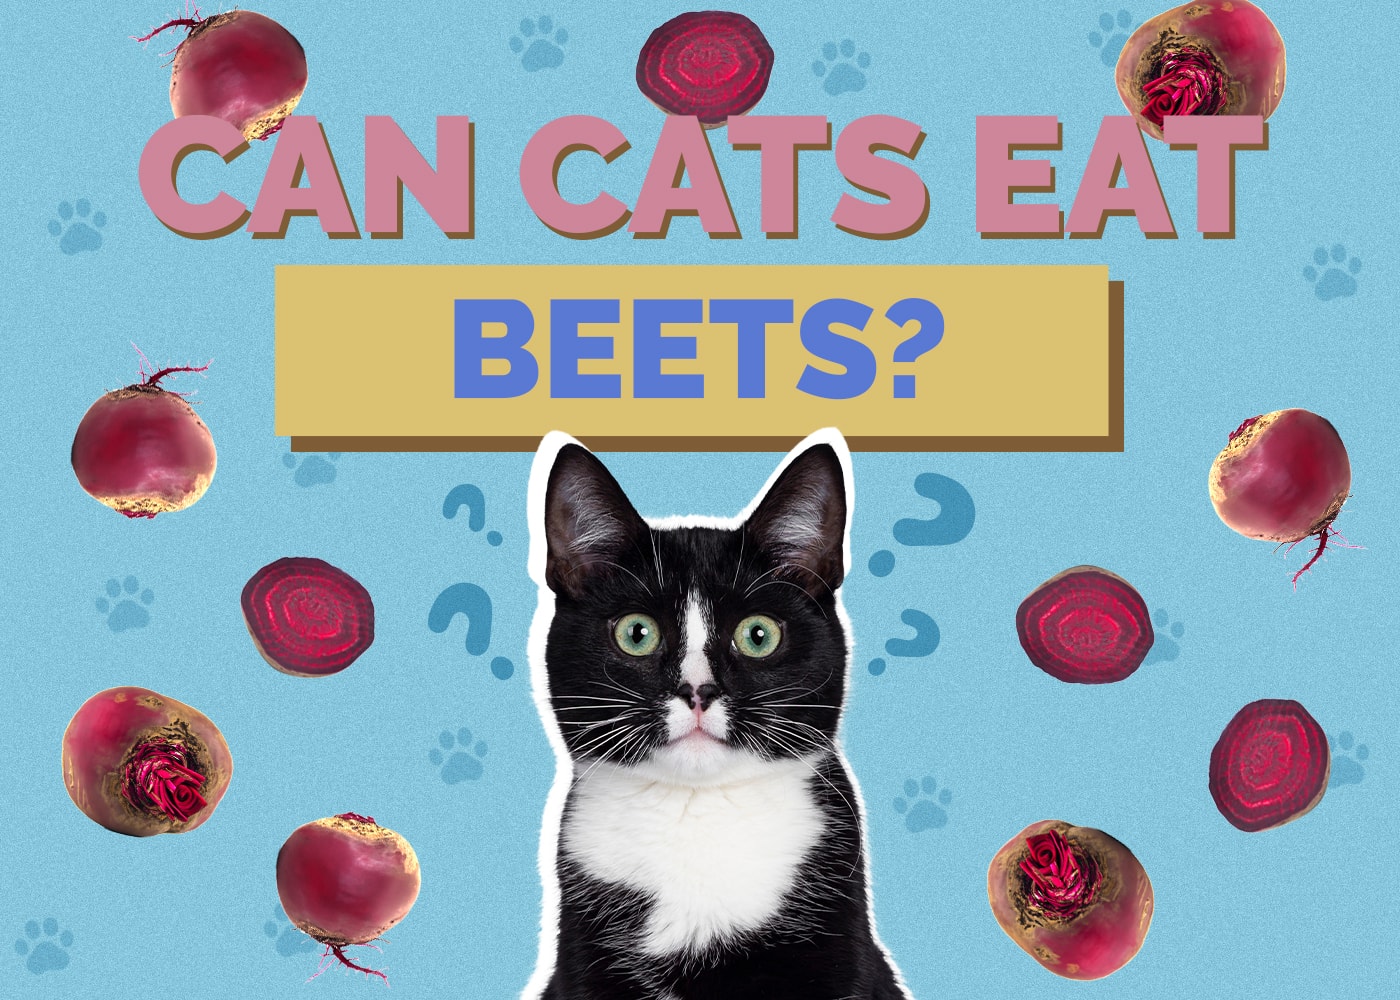 Can Cats Eat beets